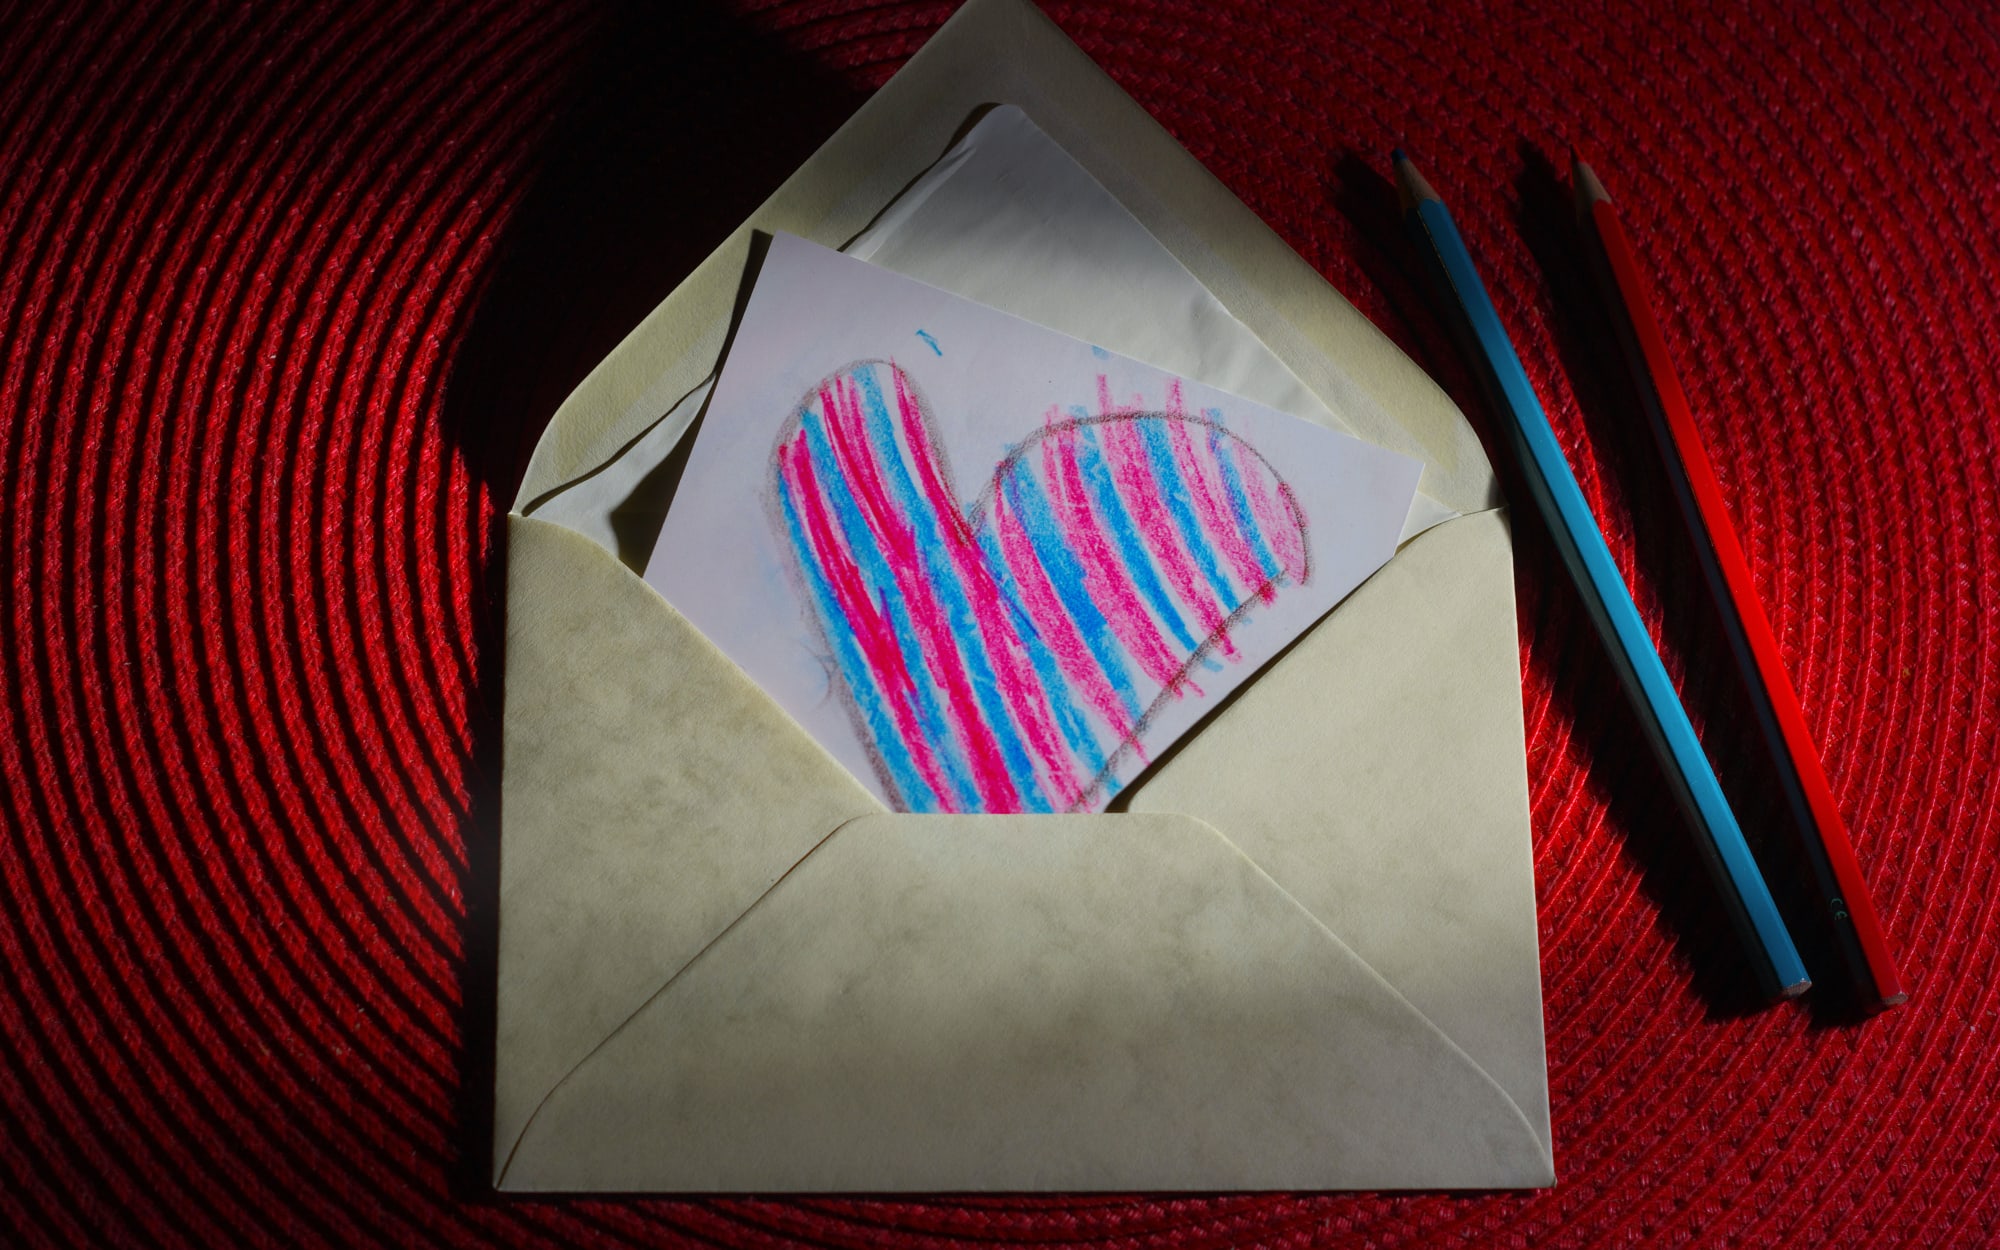 A handwritten card with a heart drawn on it, stuffed into a brown envelope.